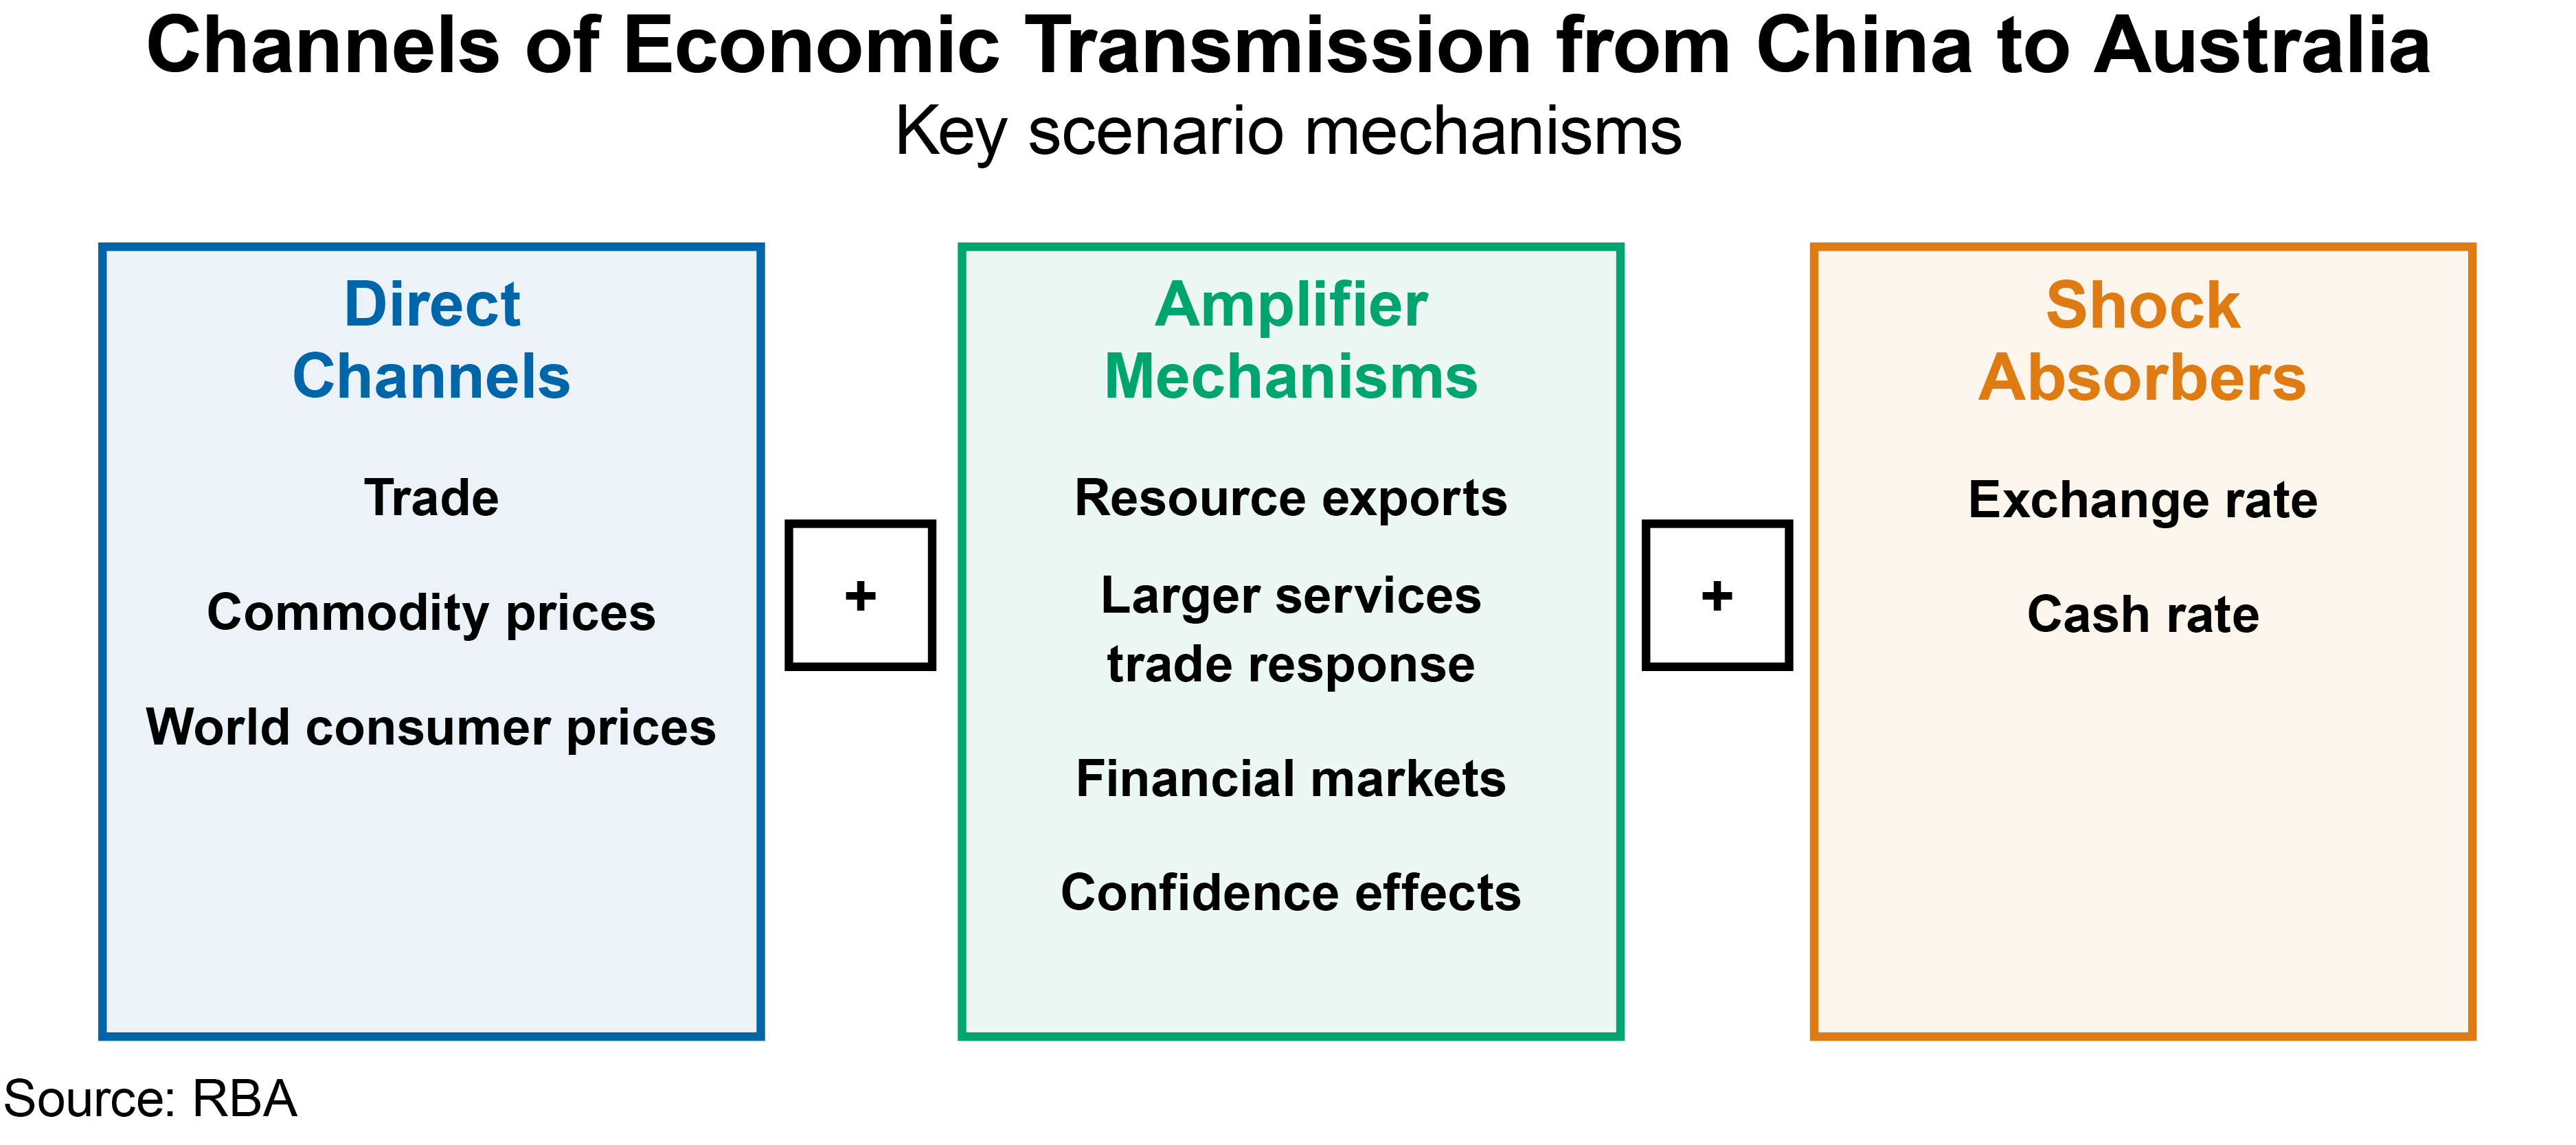 Figure 1: Channels of Economic Transmission from China to Australia